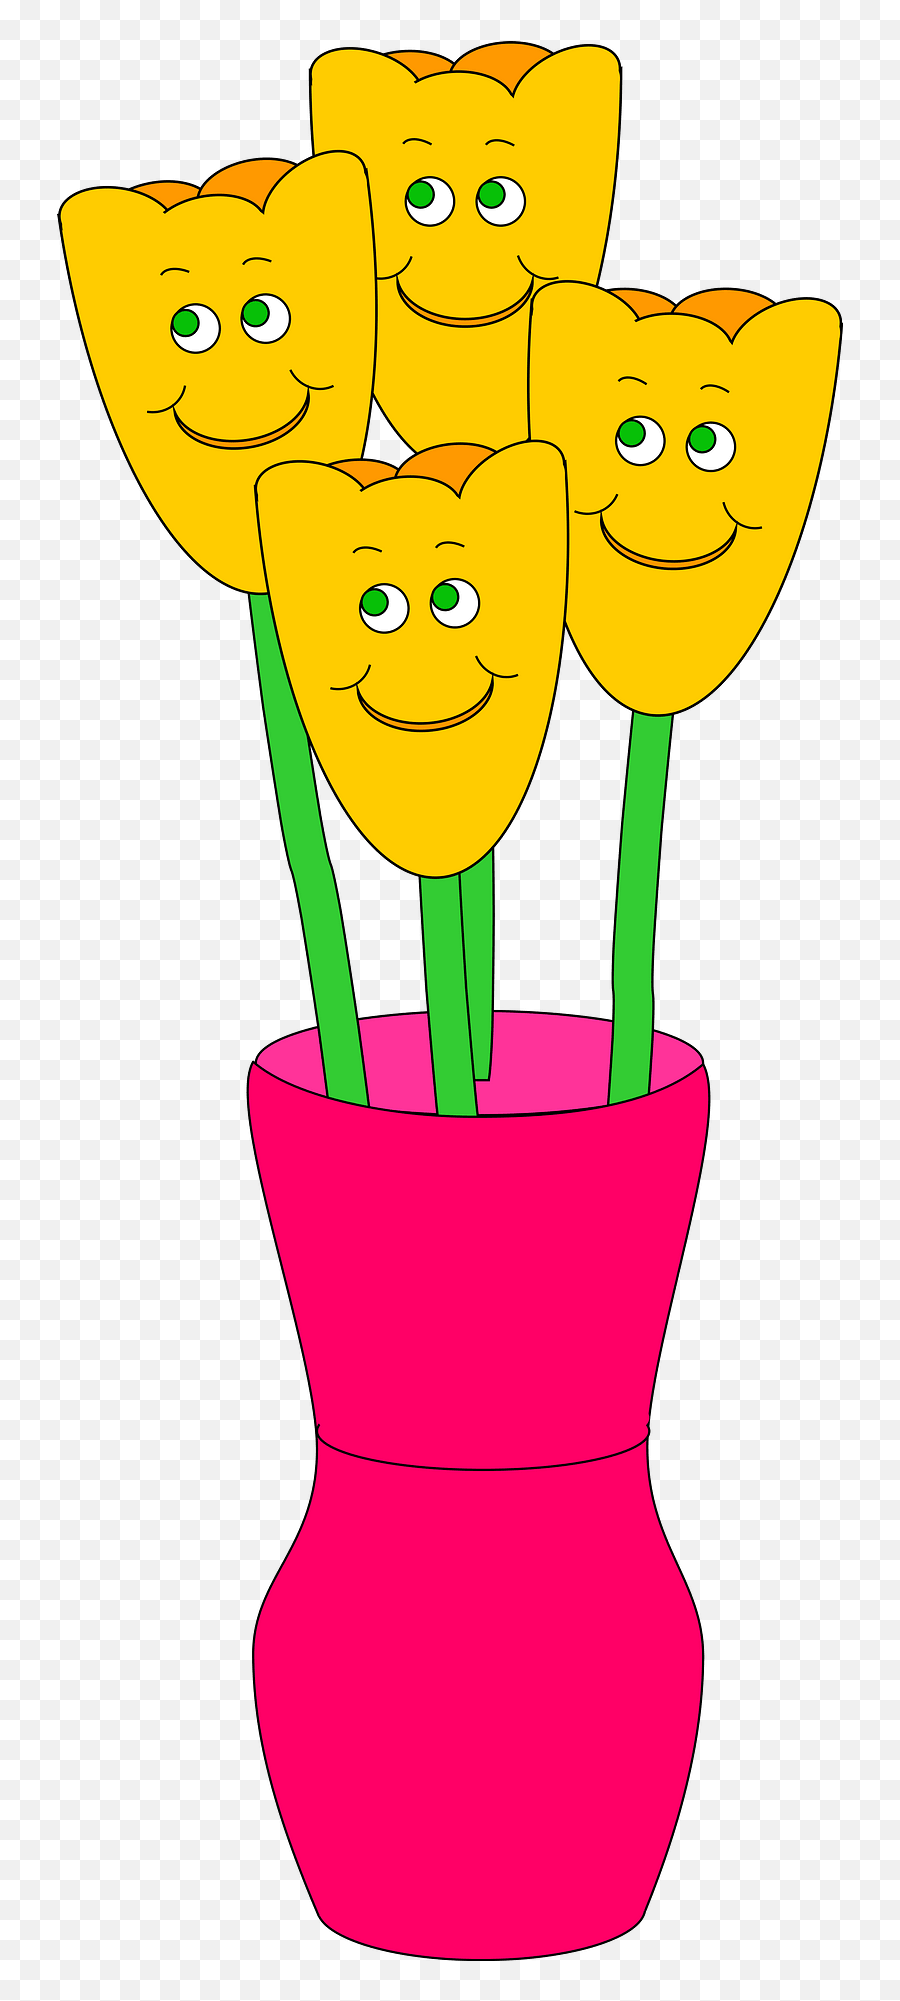 Pink Vase Of Yellow Tulips With Faces Clipart Free Download Emoji,Lavender Emoticon